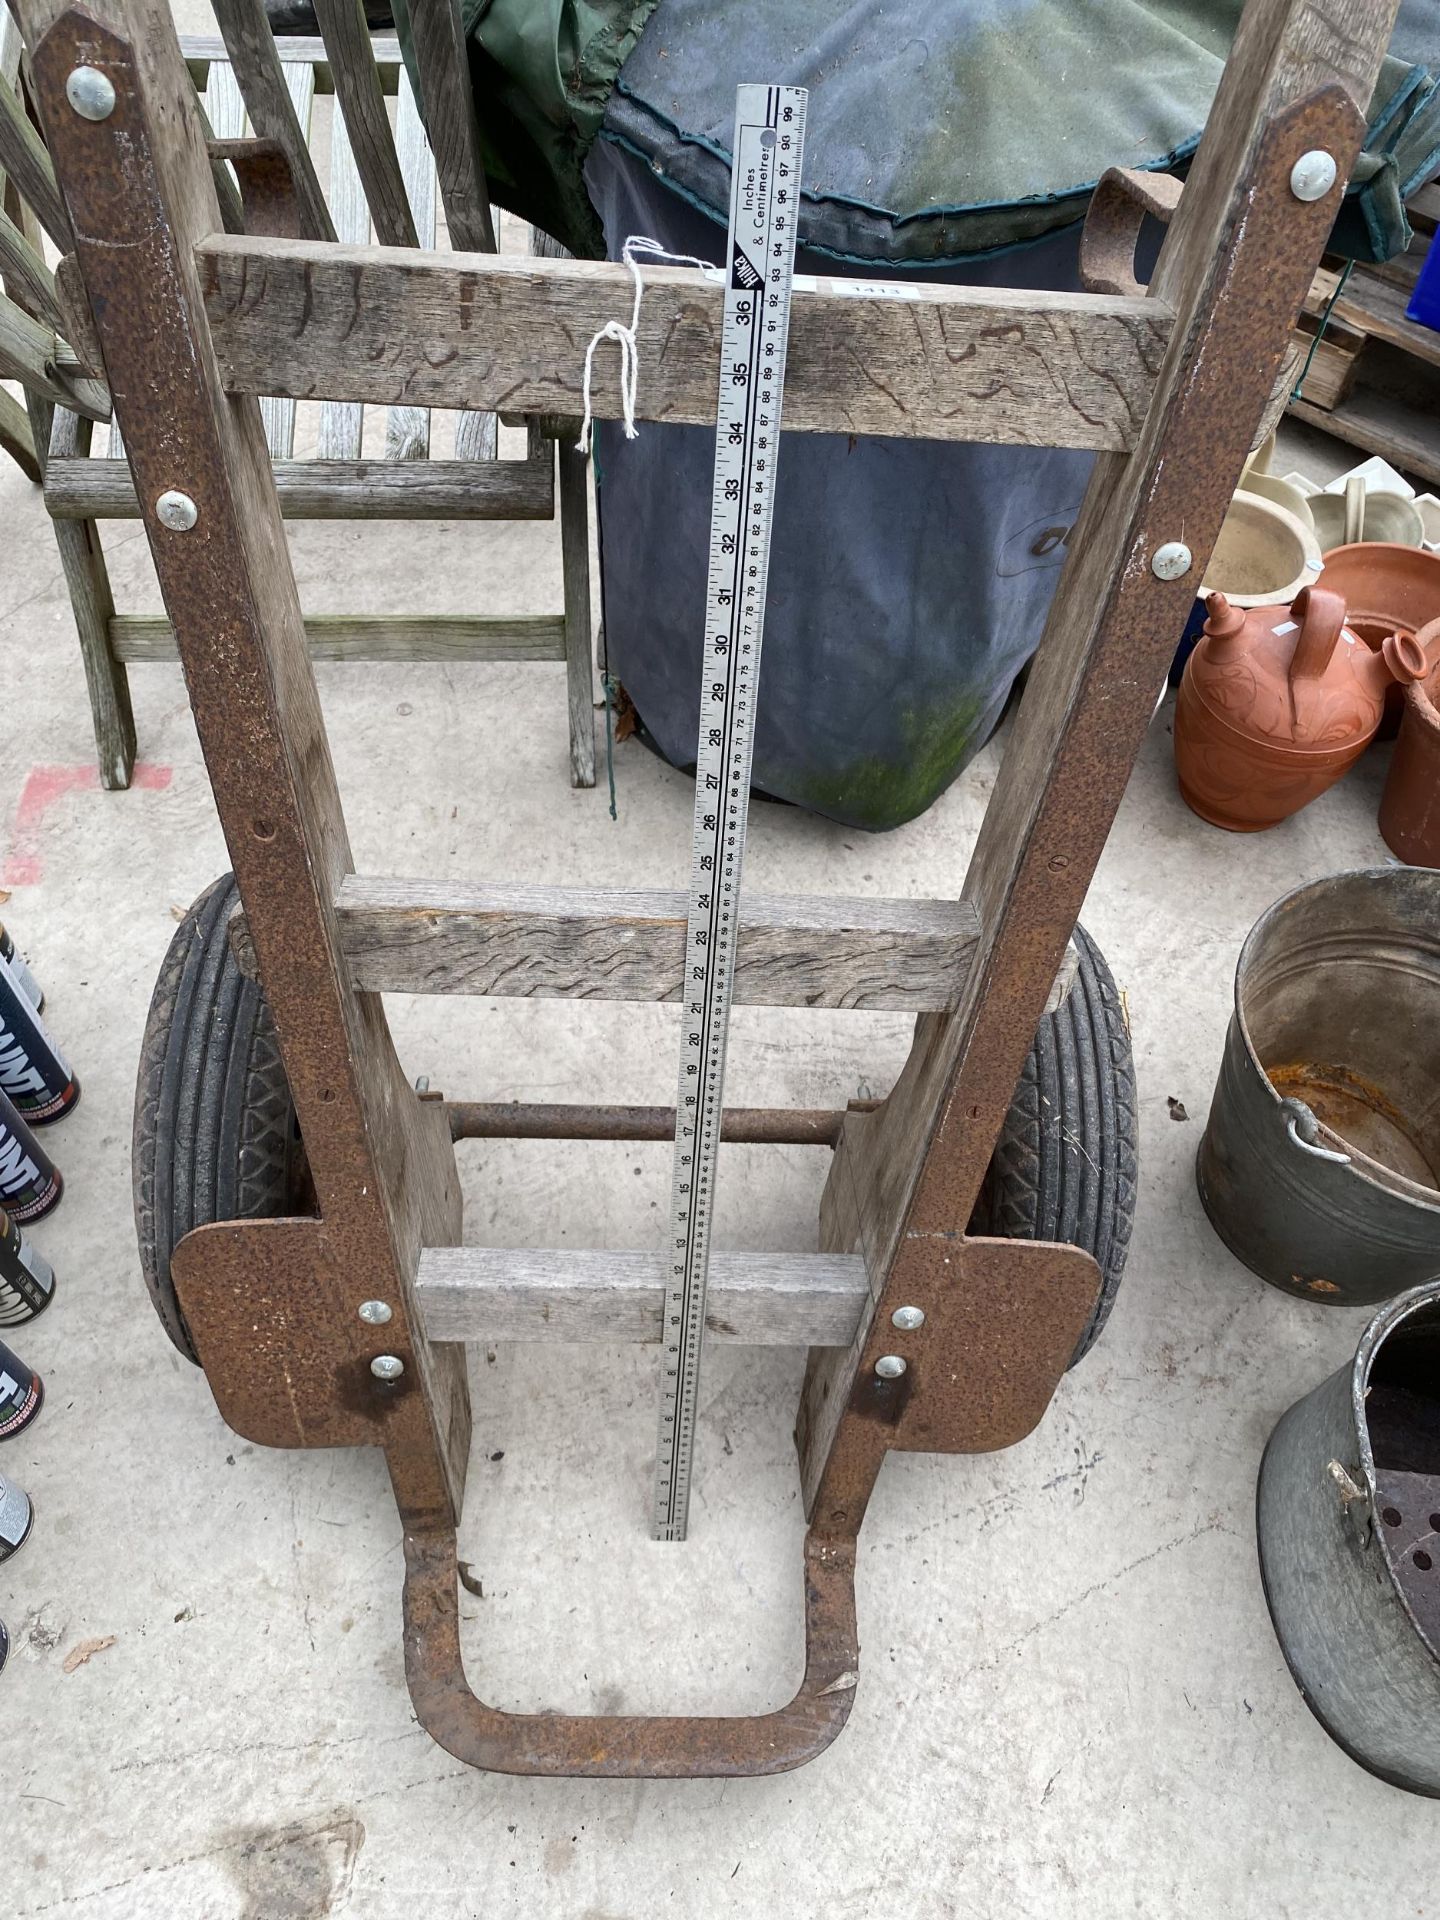 A LARGE VINTAGE WOODEN AND METAL SACK TRUCK WITH LARGE RUBBER WHEELS - Image 4 of 4